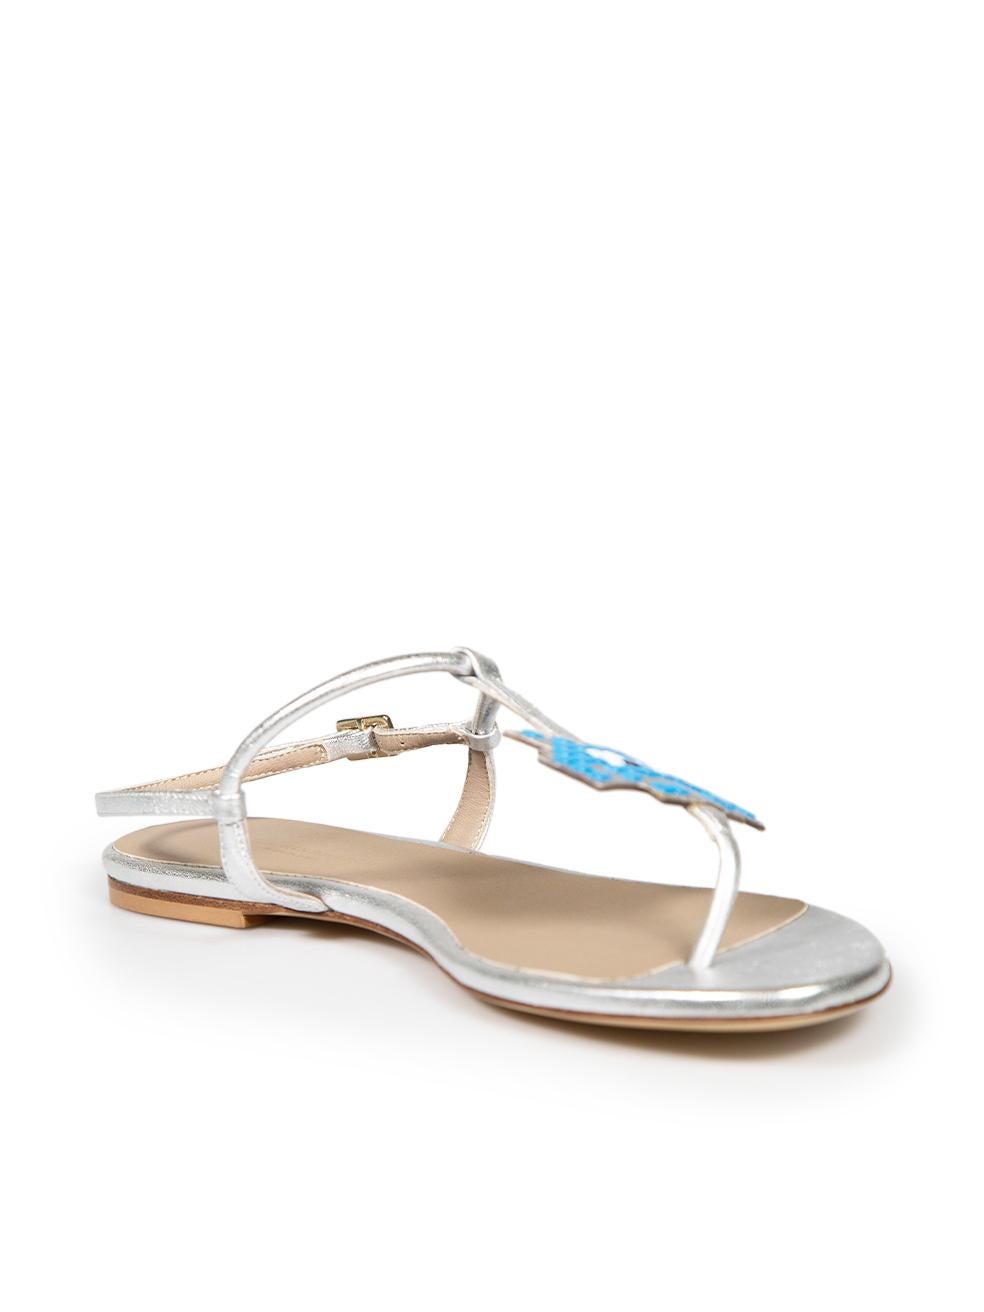 CONDITION is Very Good. Hardly any visible wear to sandals is evident. Some marks and indents are seen to both soles due to poor storage on this Anya Hindmarch designer resale item.
 
 
 
 Details
 
 
 Silver metallic
 
 Leather
 
 Sandals
 
 Thong